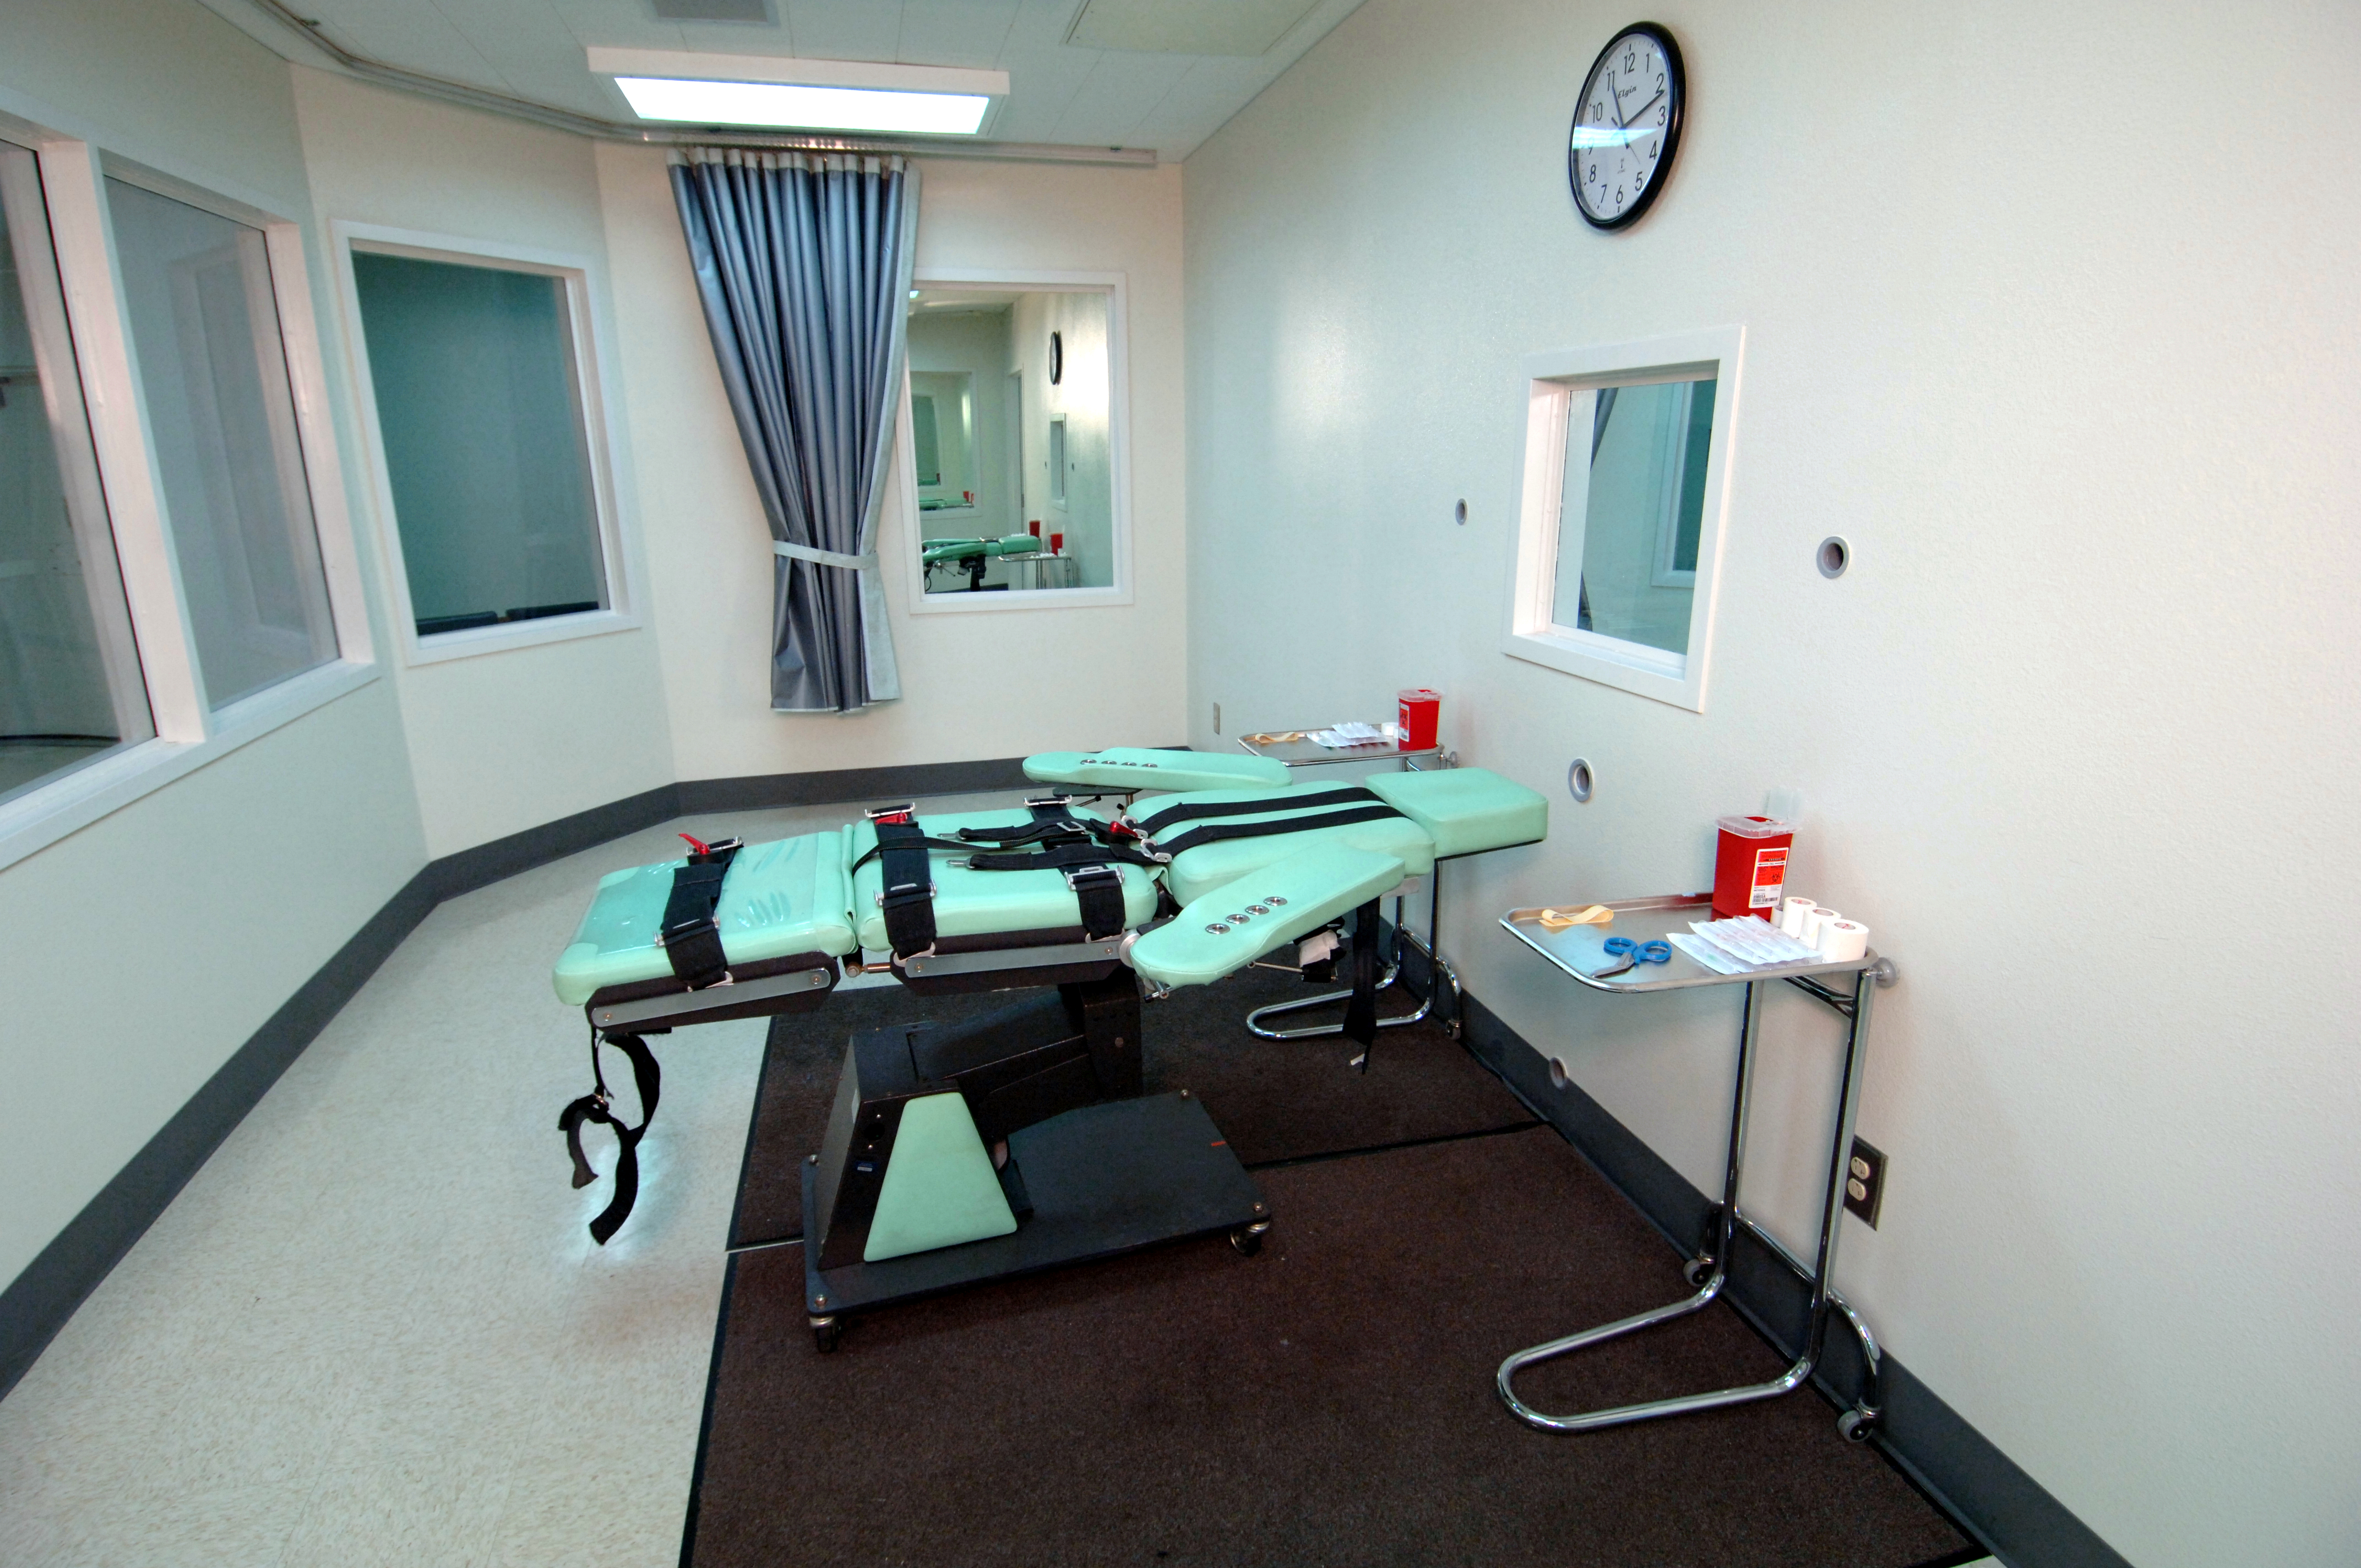 Report highlights declining but problematic use of death penalty across US